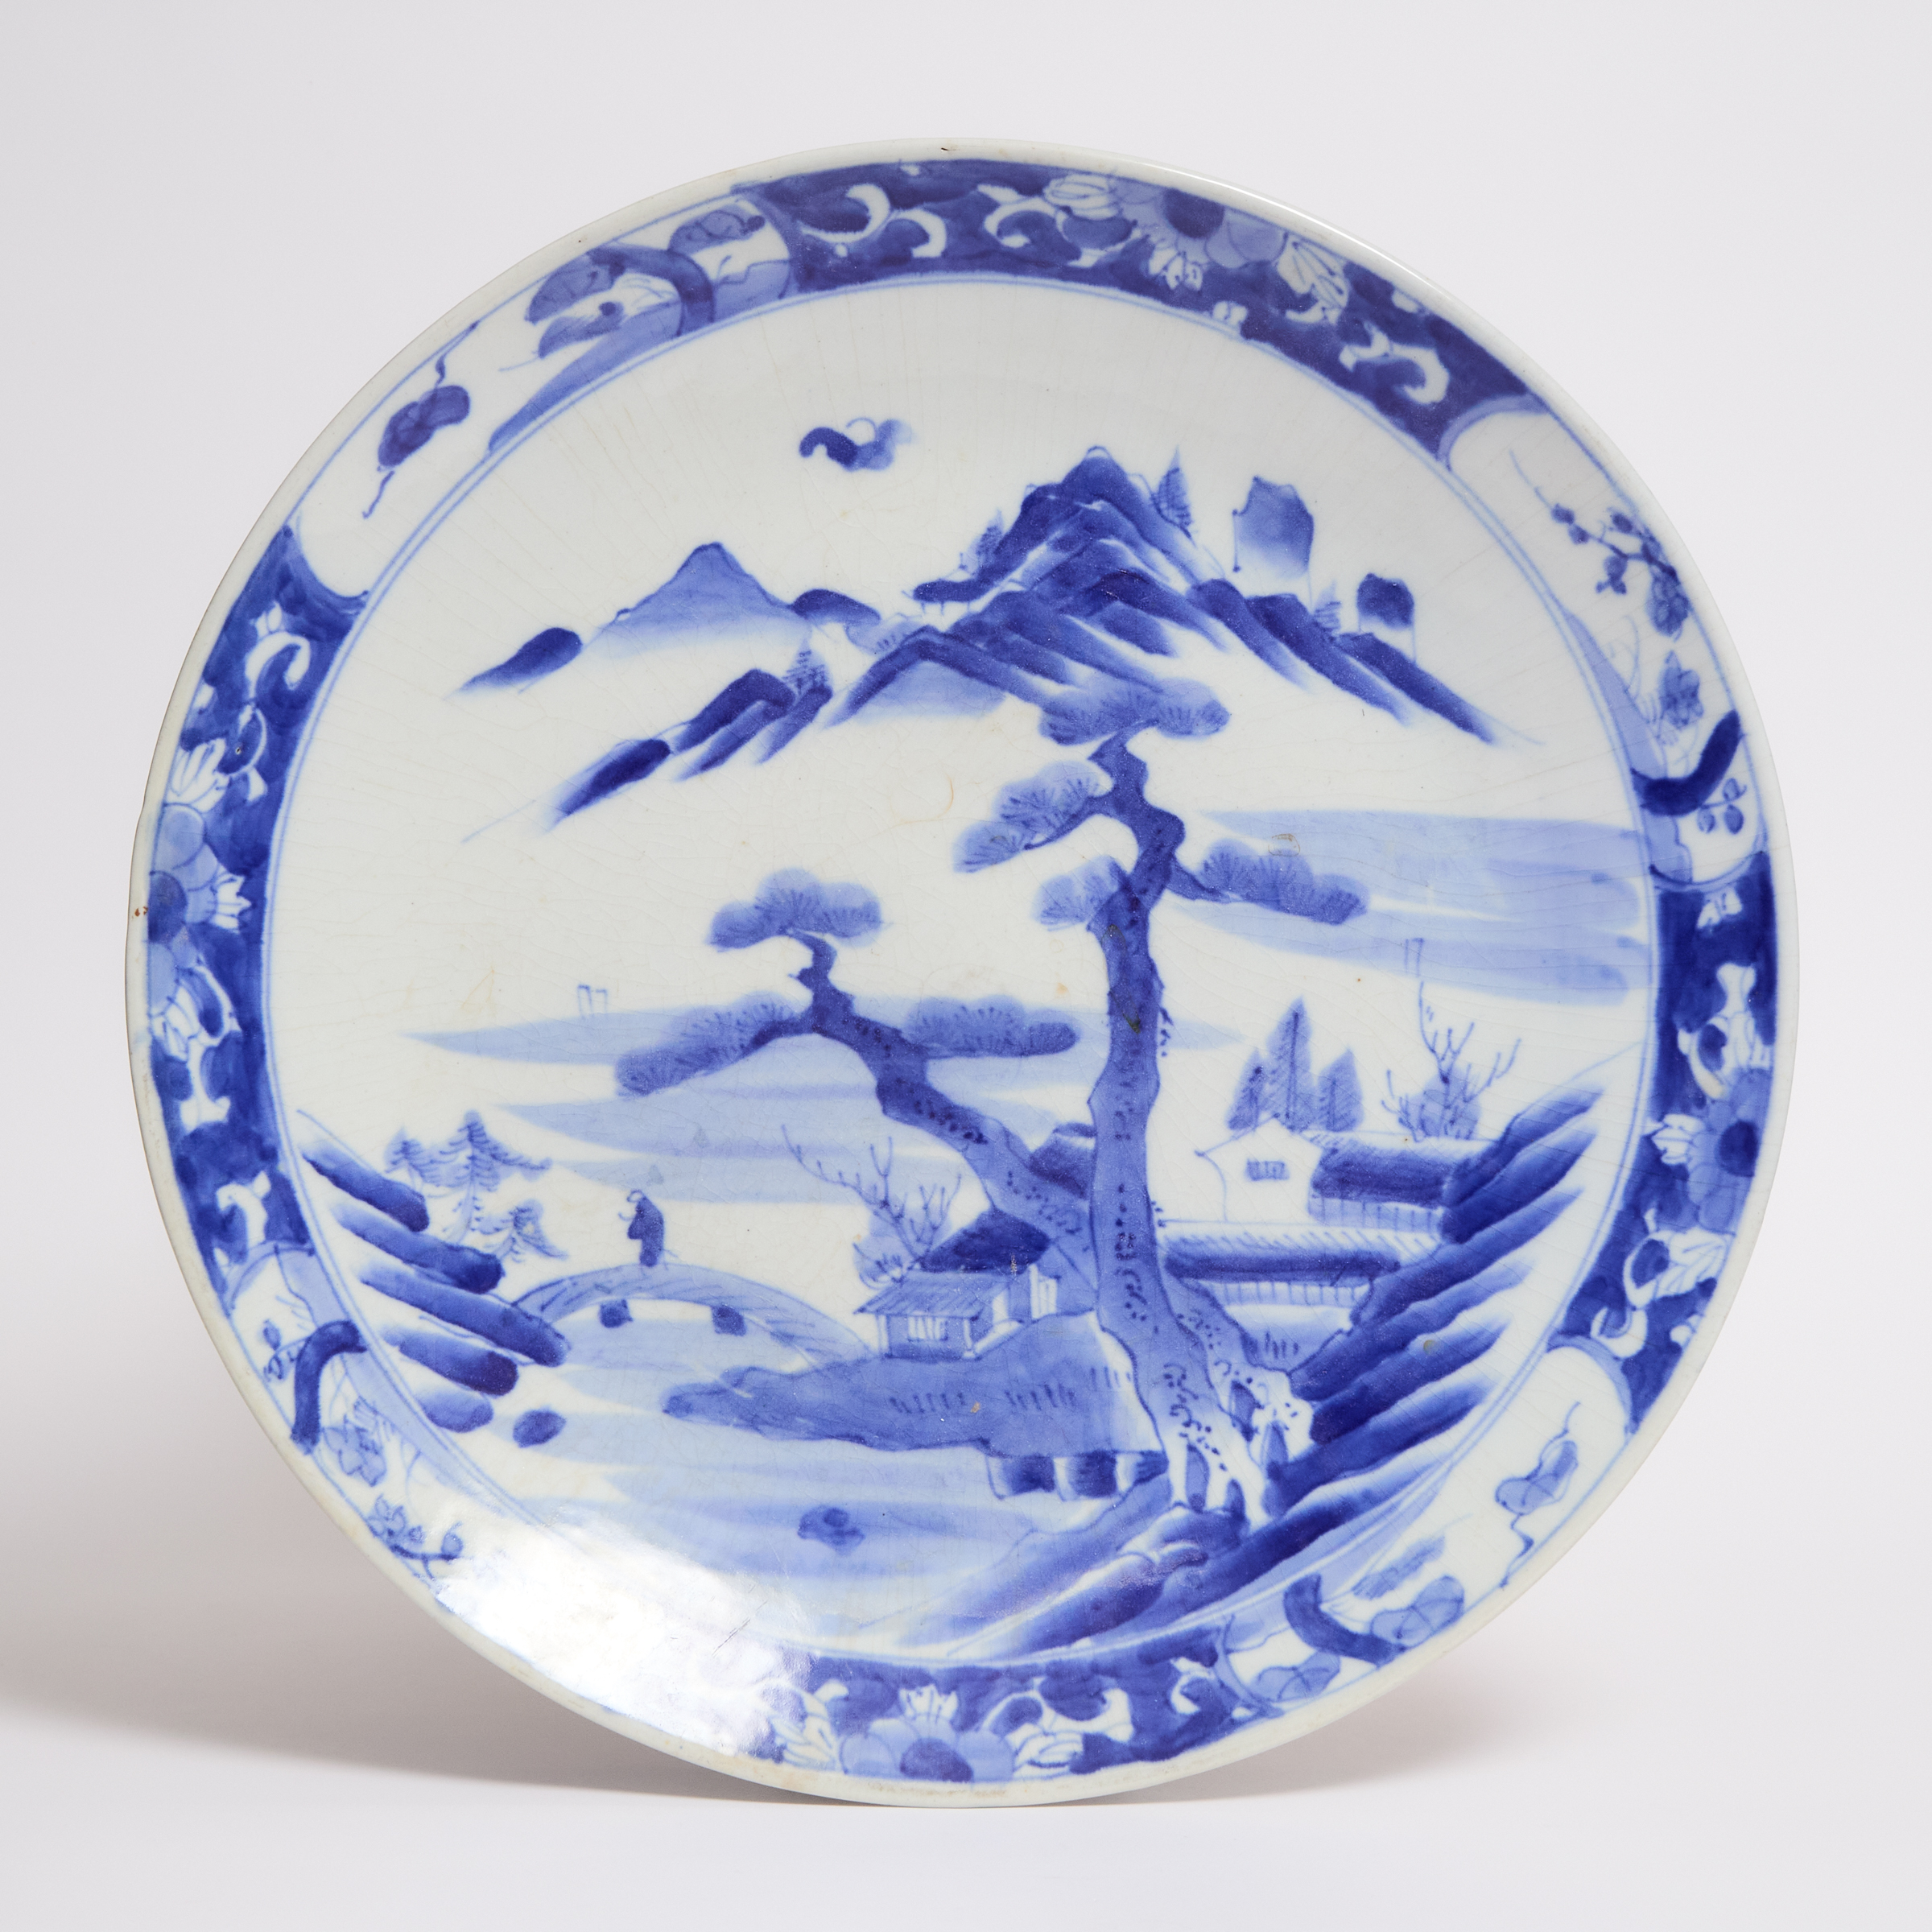 A Large Arita Blue and White Charger, 19th Century